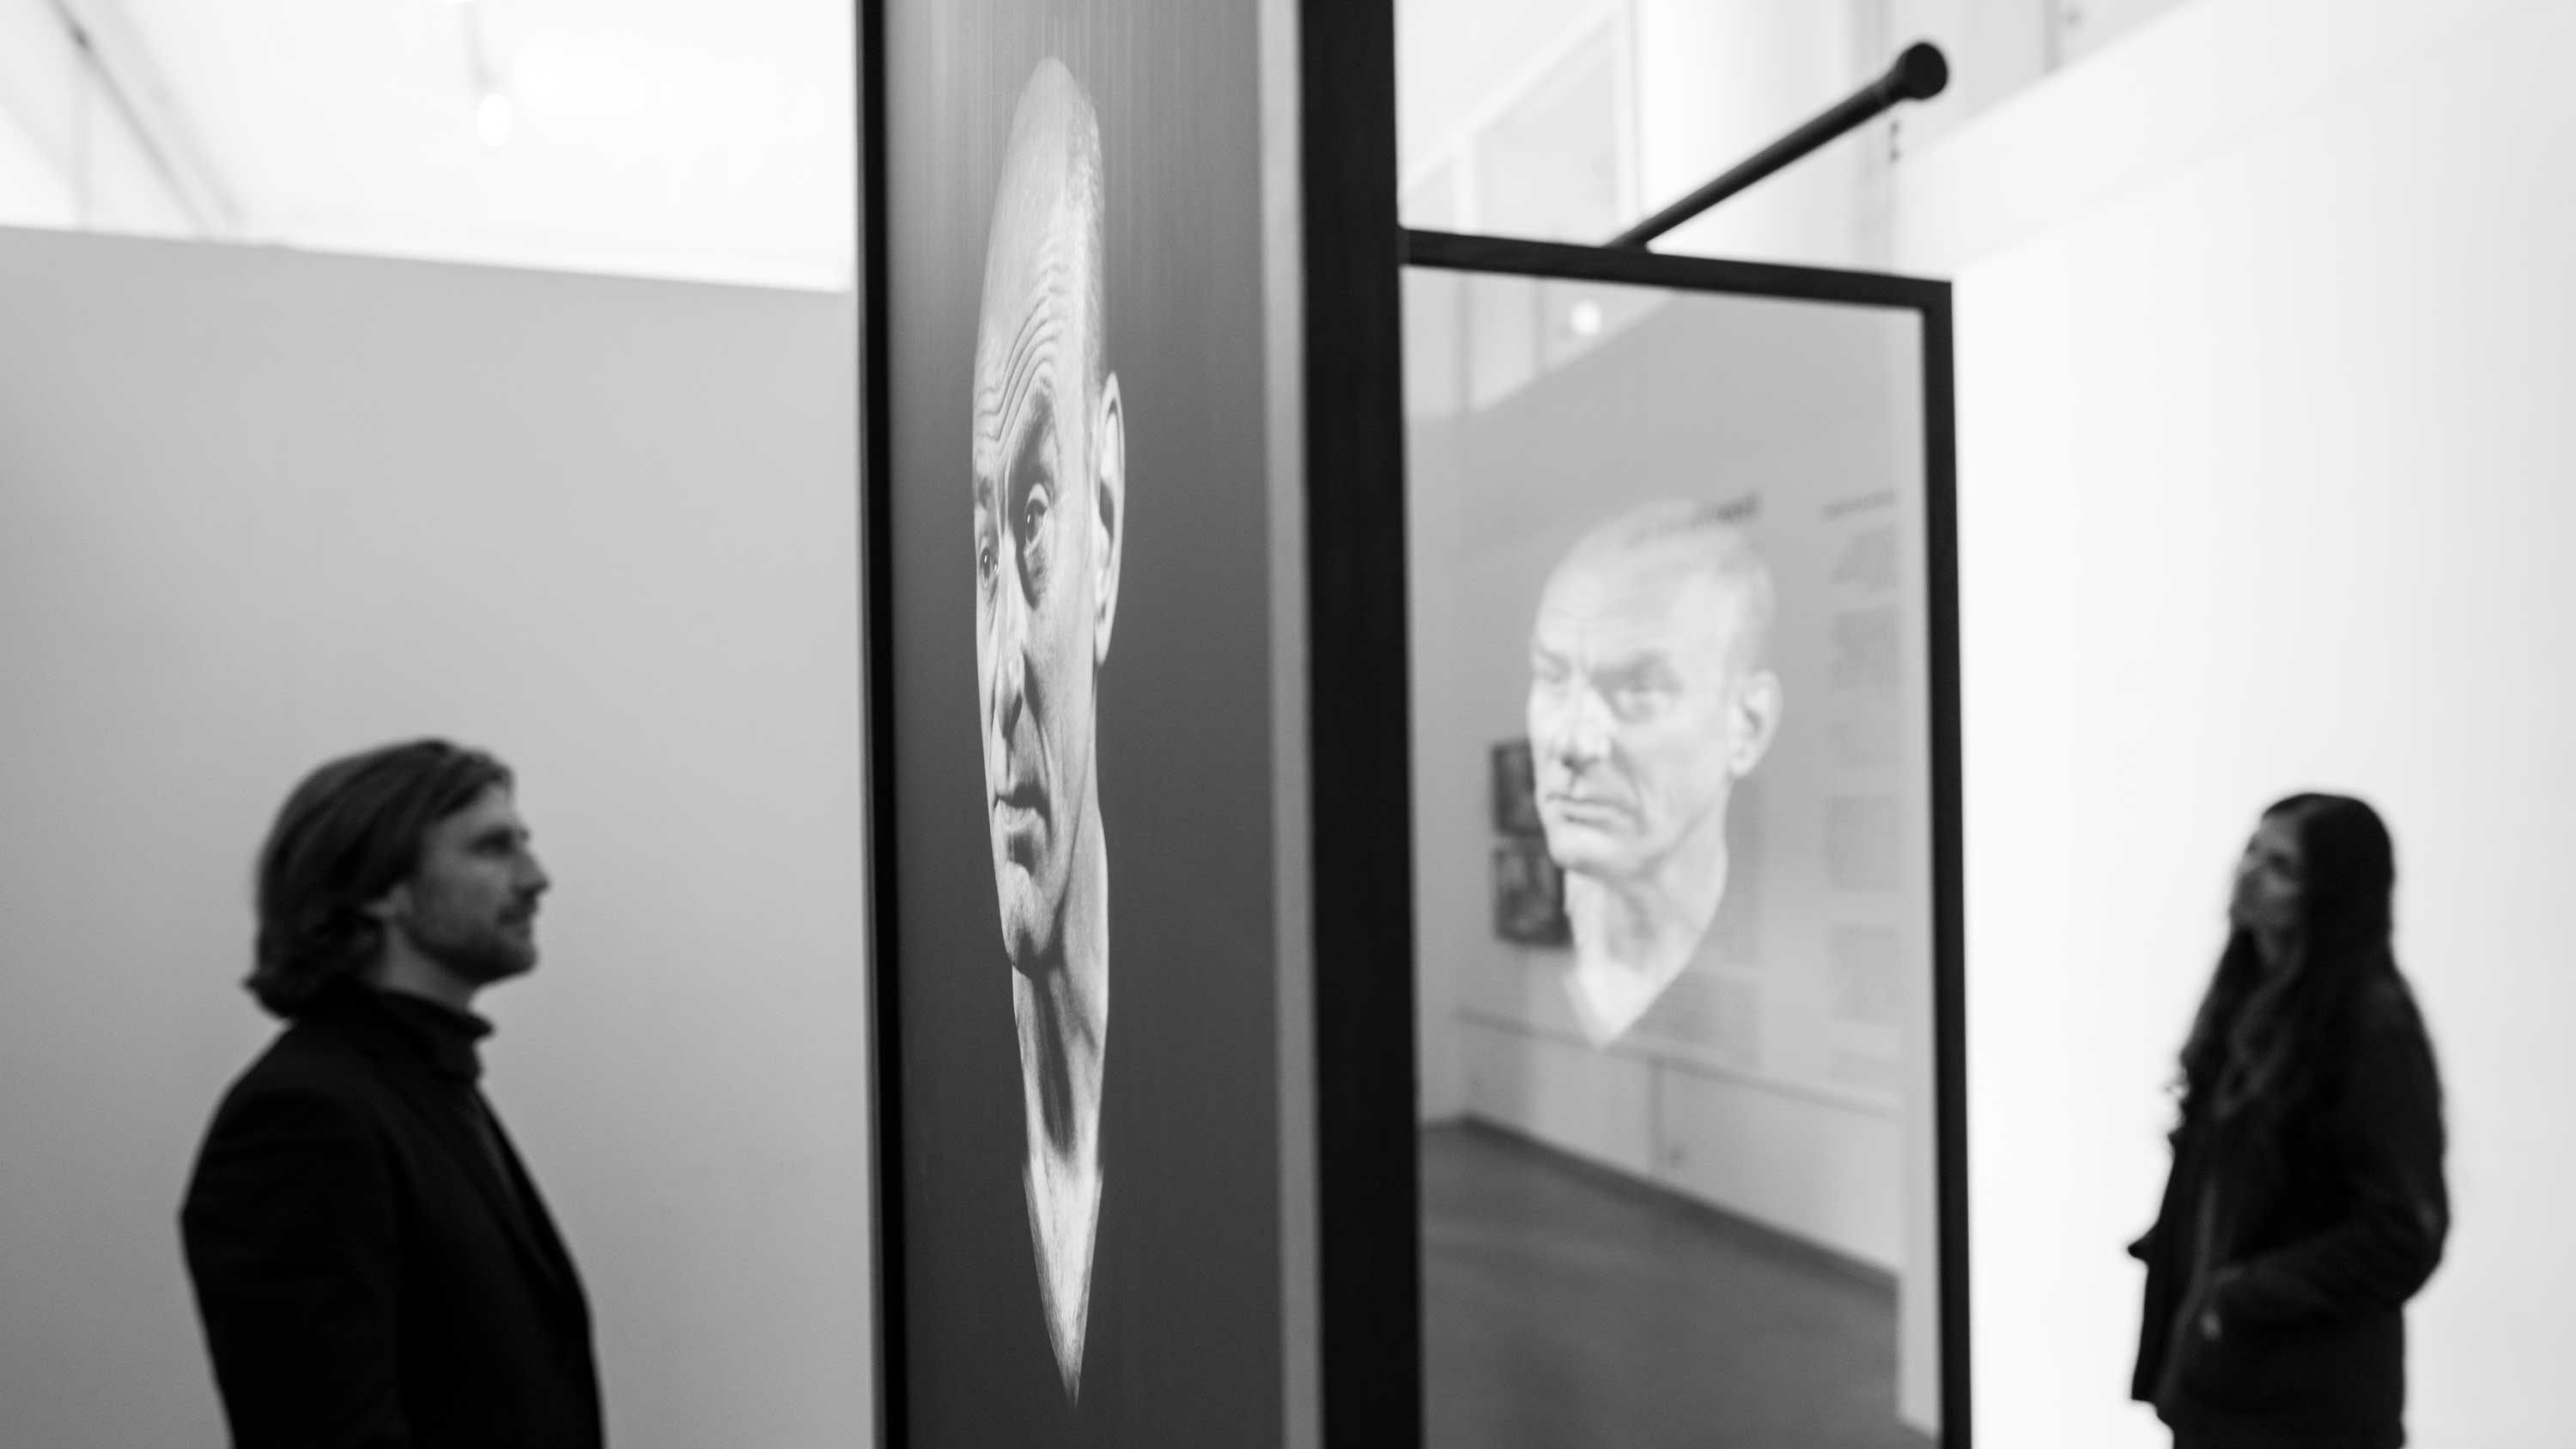 Installation of Mirror I by David Cotterrell - An image of a man is displayed on a screen. David Cotterrell and Ruwanthie de Chickera are viewing the work.